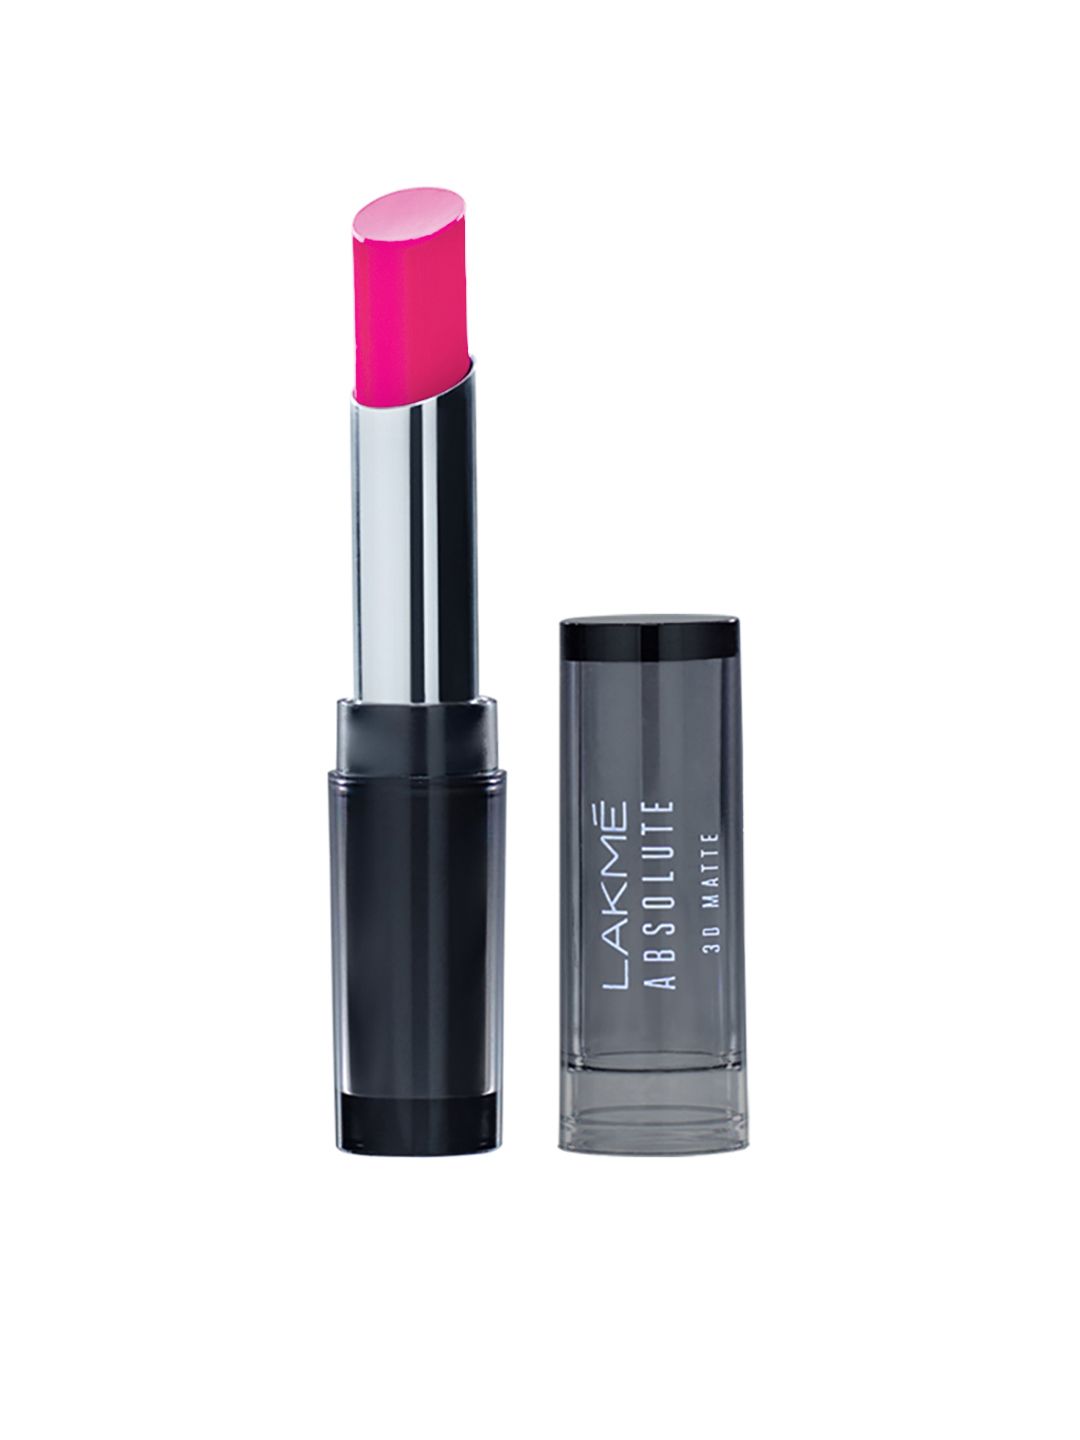 Lakme Absolute 3D Matte Lip Color - Plum Spell 04 3.6 g Price in India